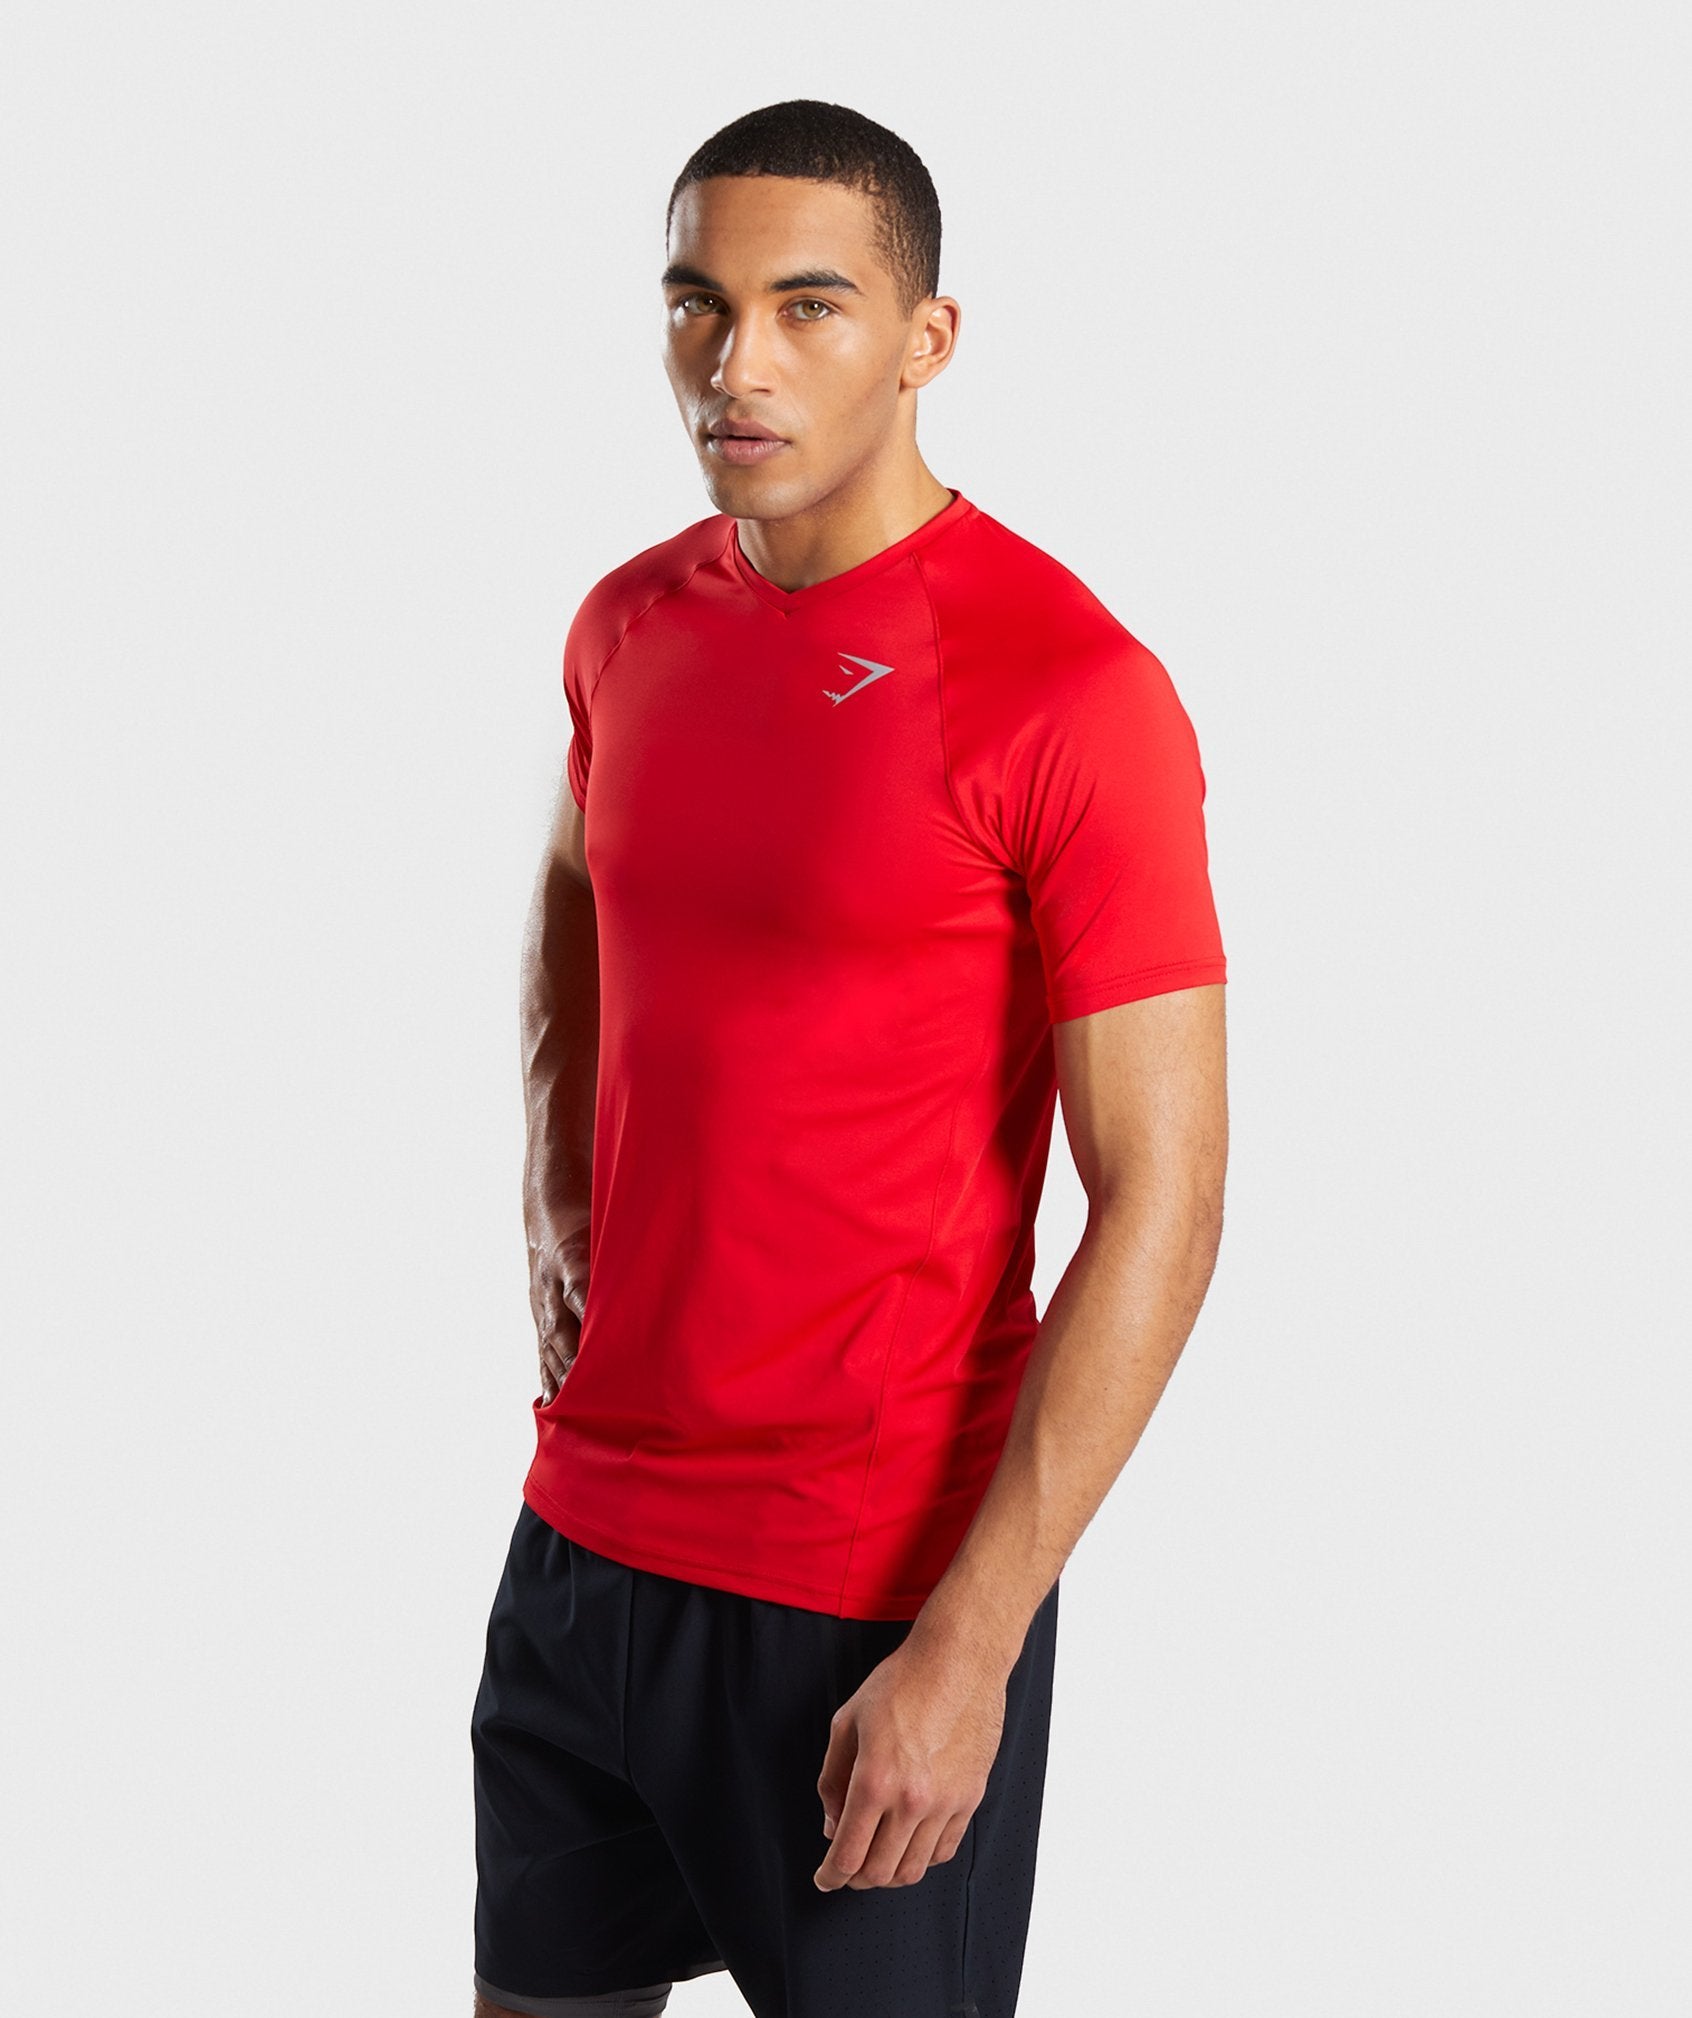 Veer T-Shirt in Red - view 3